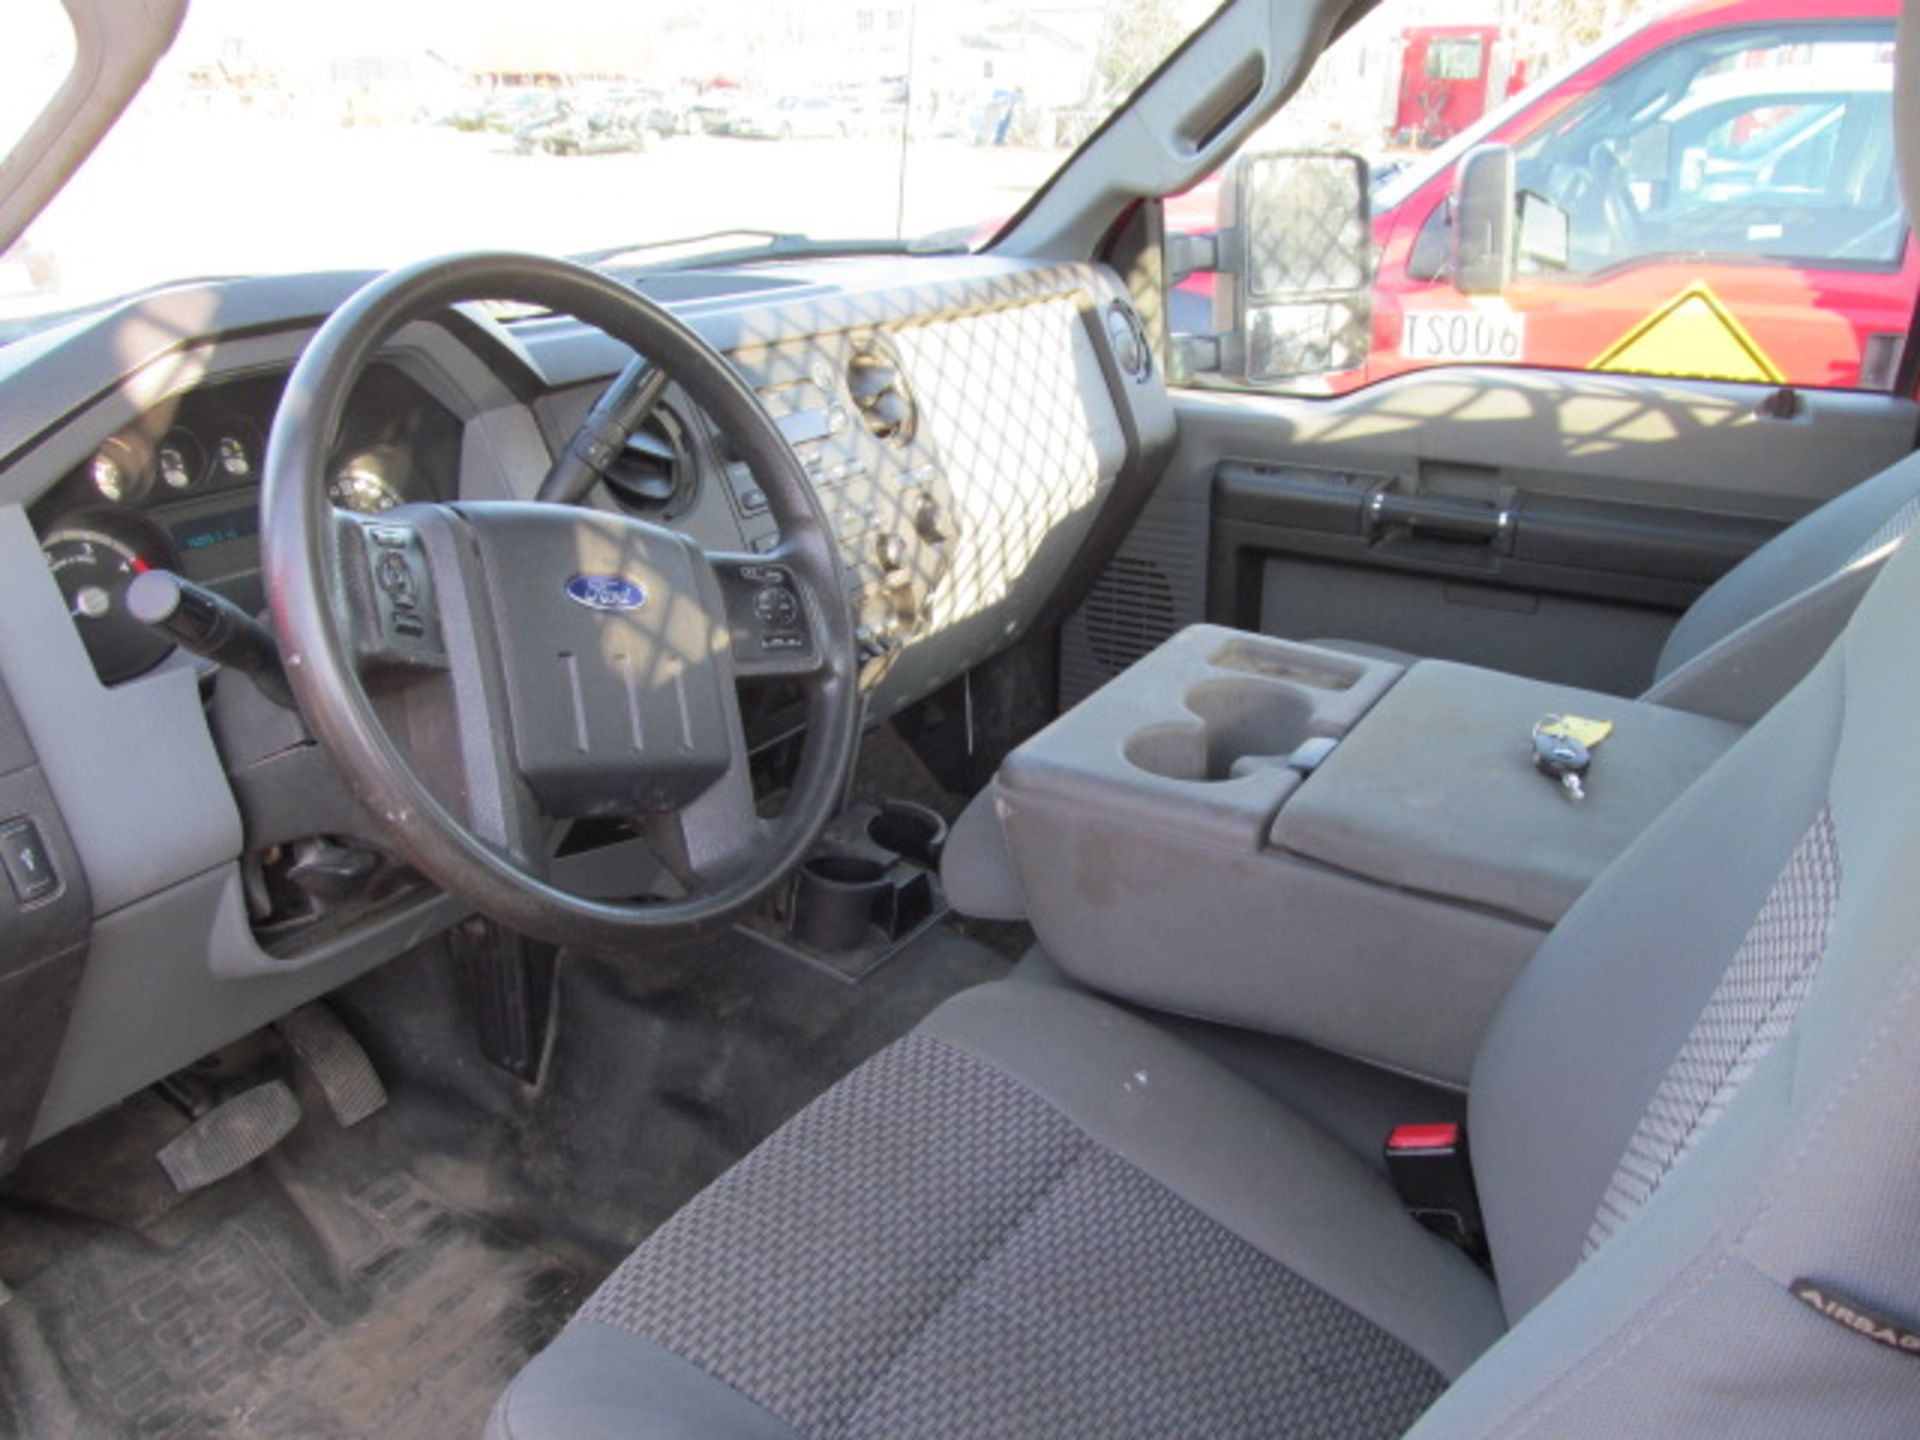 2014 Ford F550 Stakebed Truck; 6.7L Power Stroke B20 (VIN: 1FDUF5GT5EEB45103) [Estimated Mileage: - Image 5 of 5